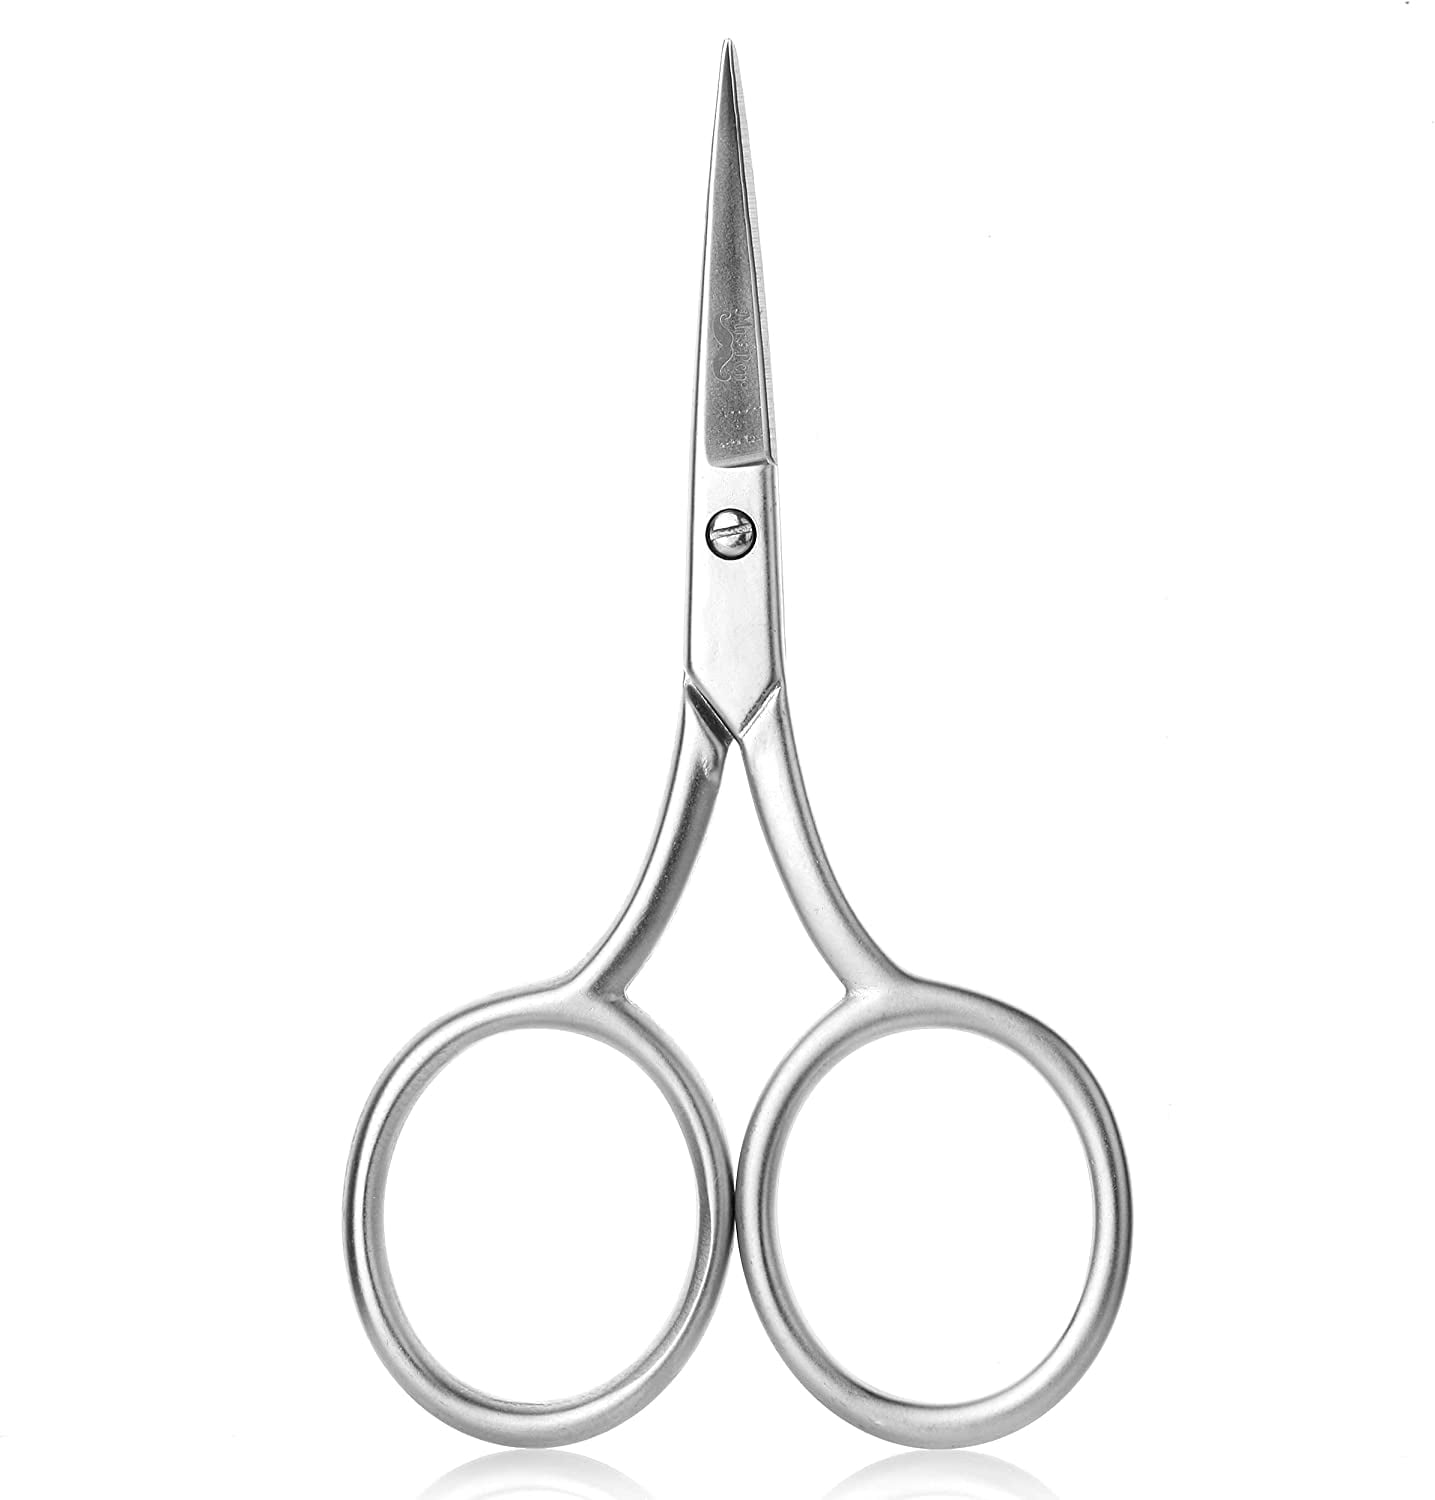 Small Scissors 3.6 Inch Embroidery Scissors Sharp Stainless Steel  Needlepoint Sc